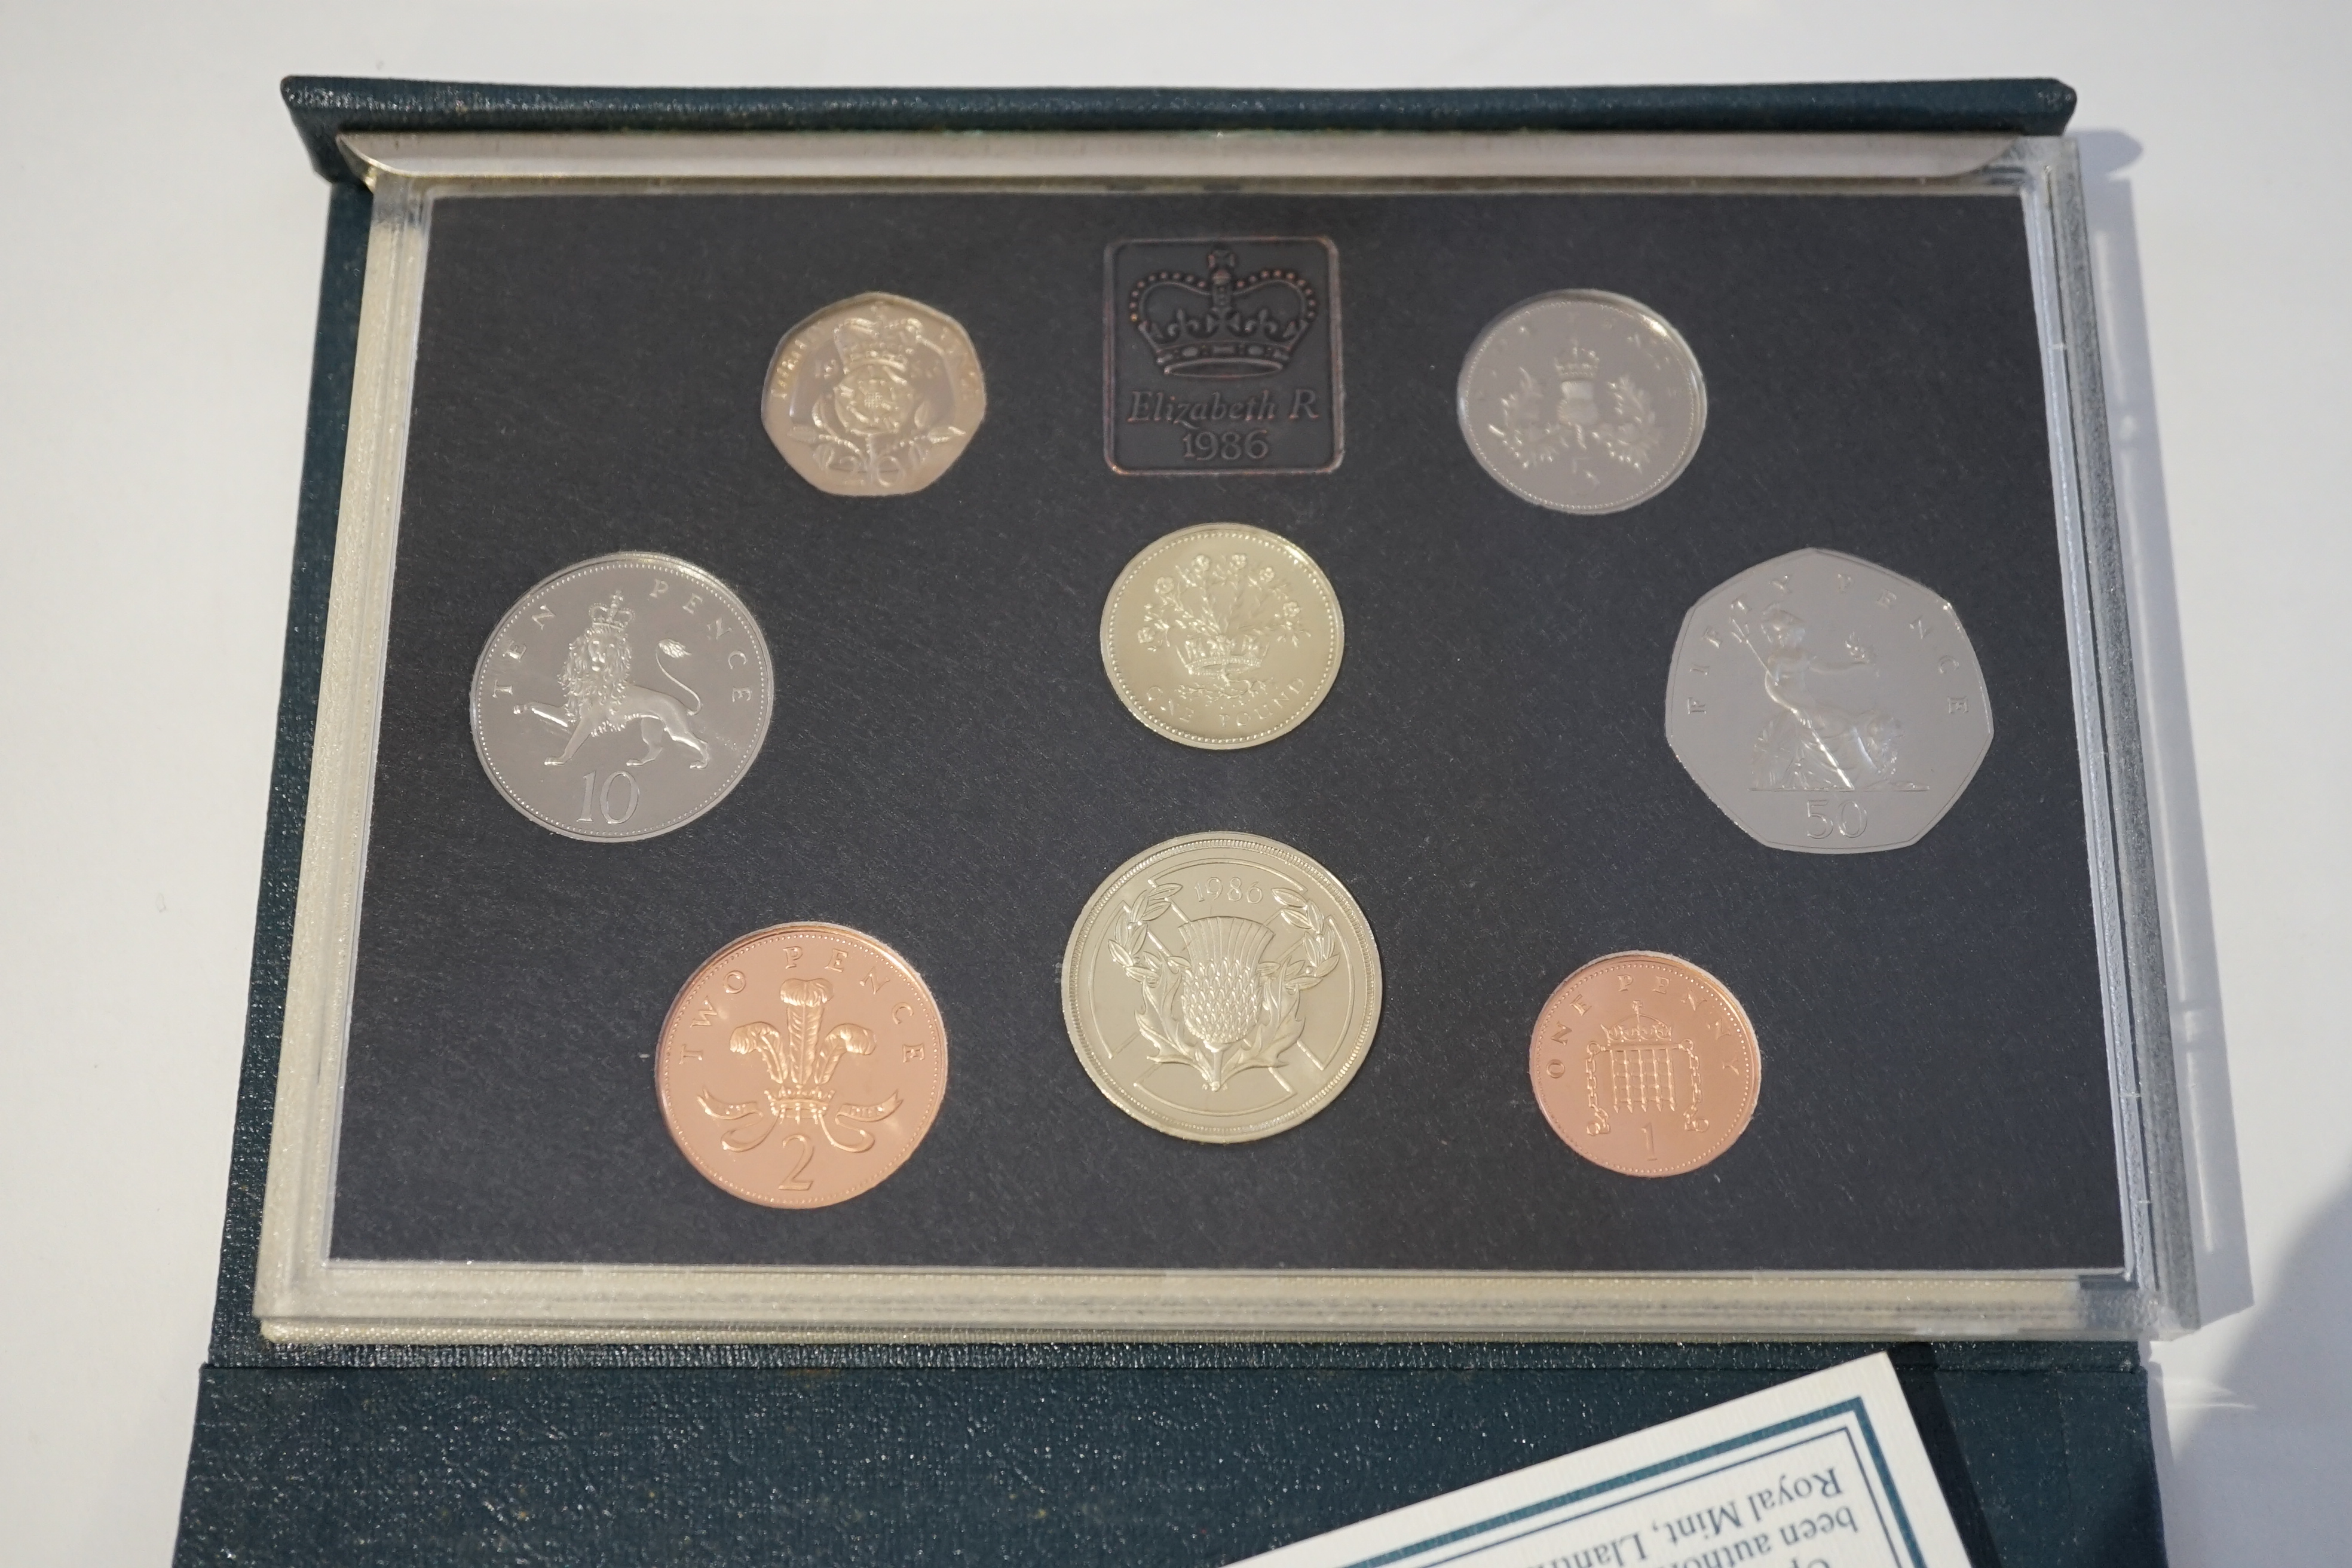 British coins, Elizabeth II, two proof coin collection year sets for 1992 and 1986, together with ten brilliant uncirculated coins of Great Britain and Northern Ireland 1979 year sets, a Golden jubilee crown and three Po